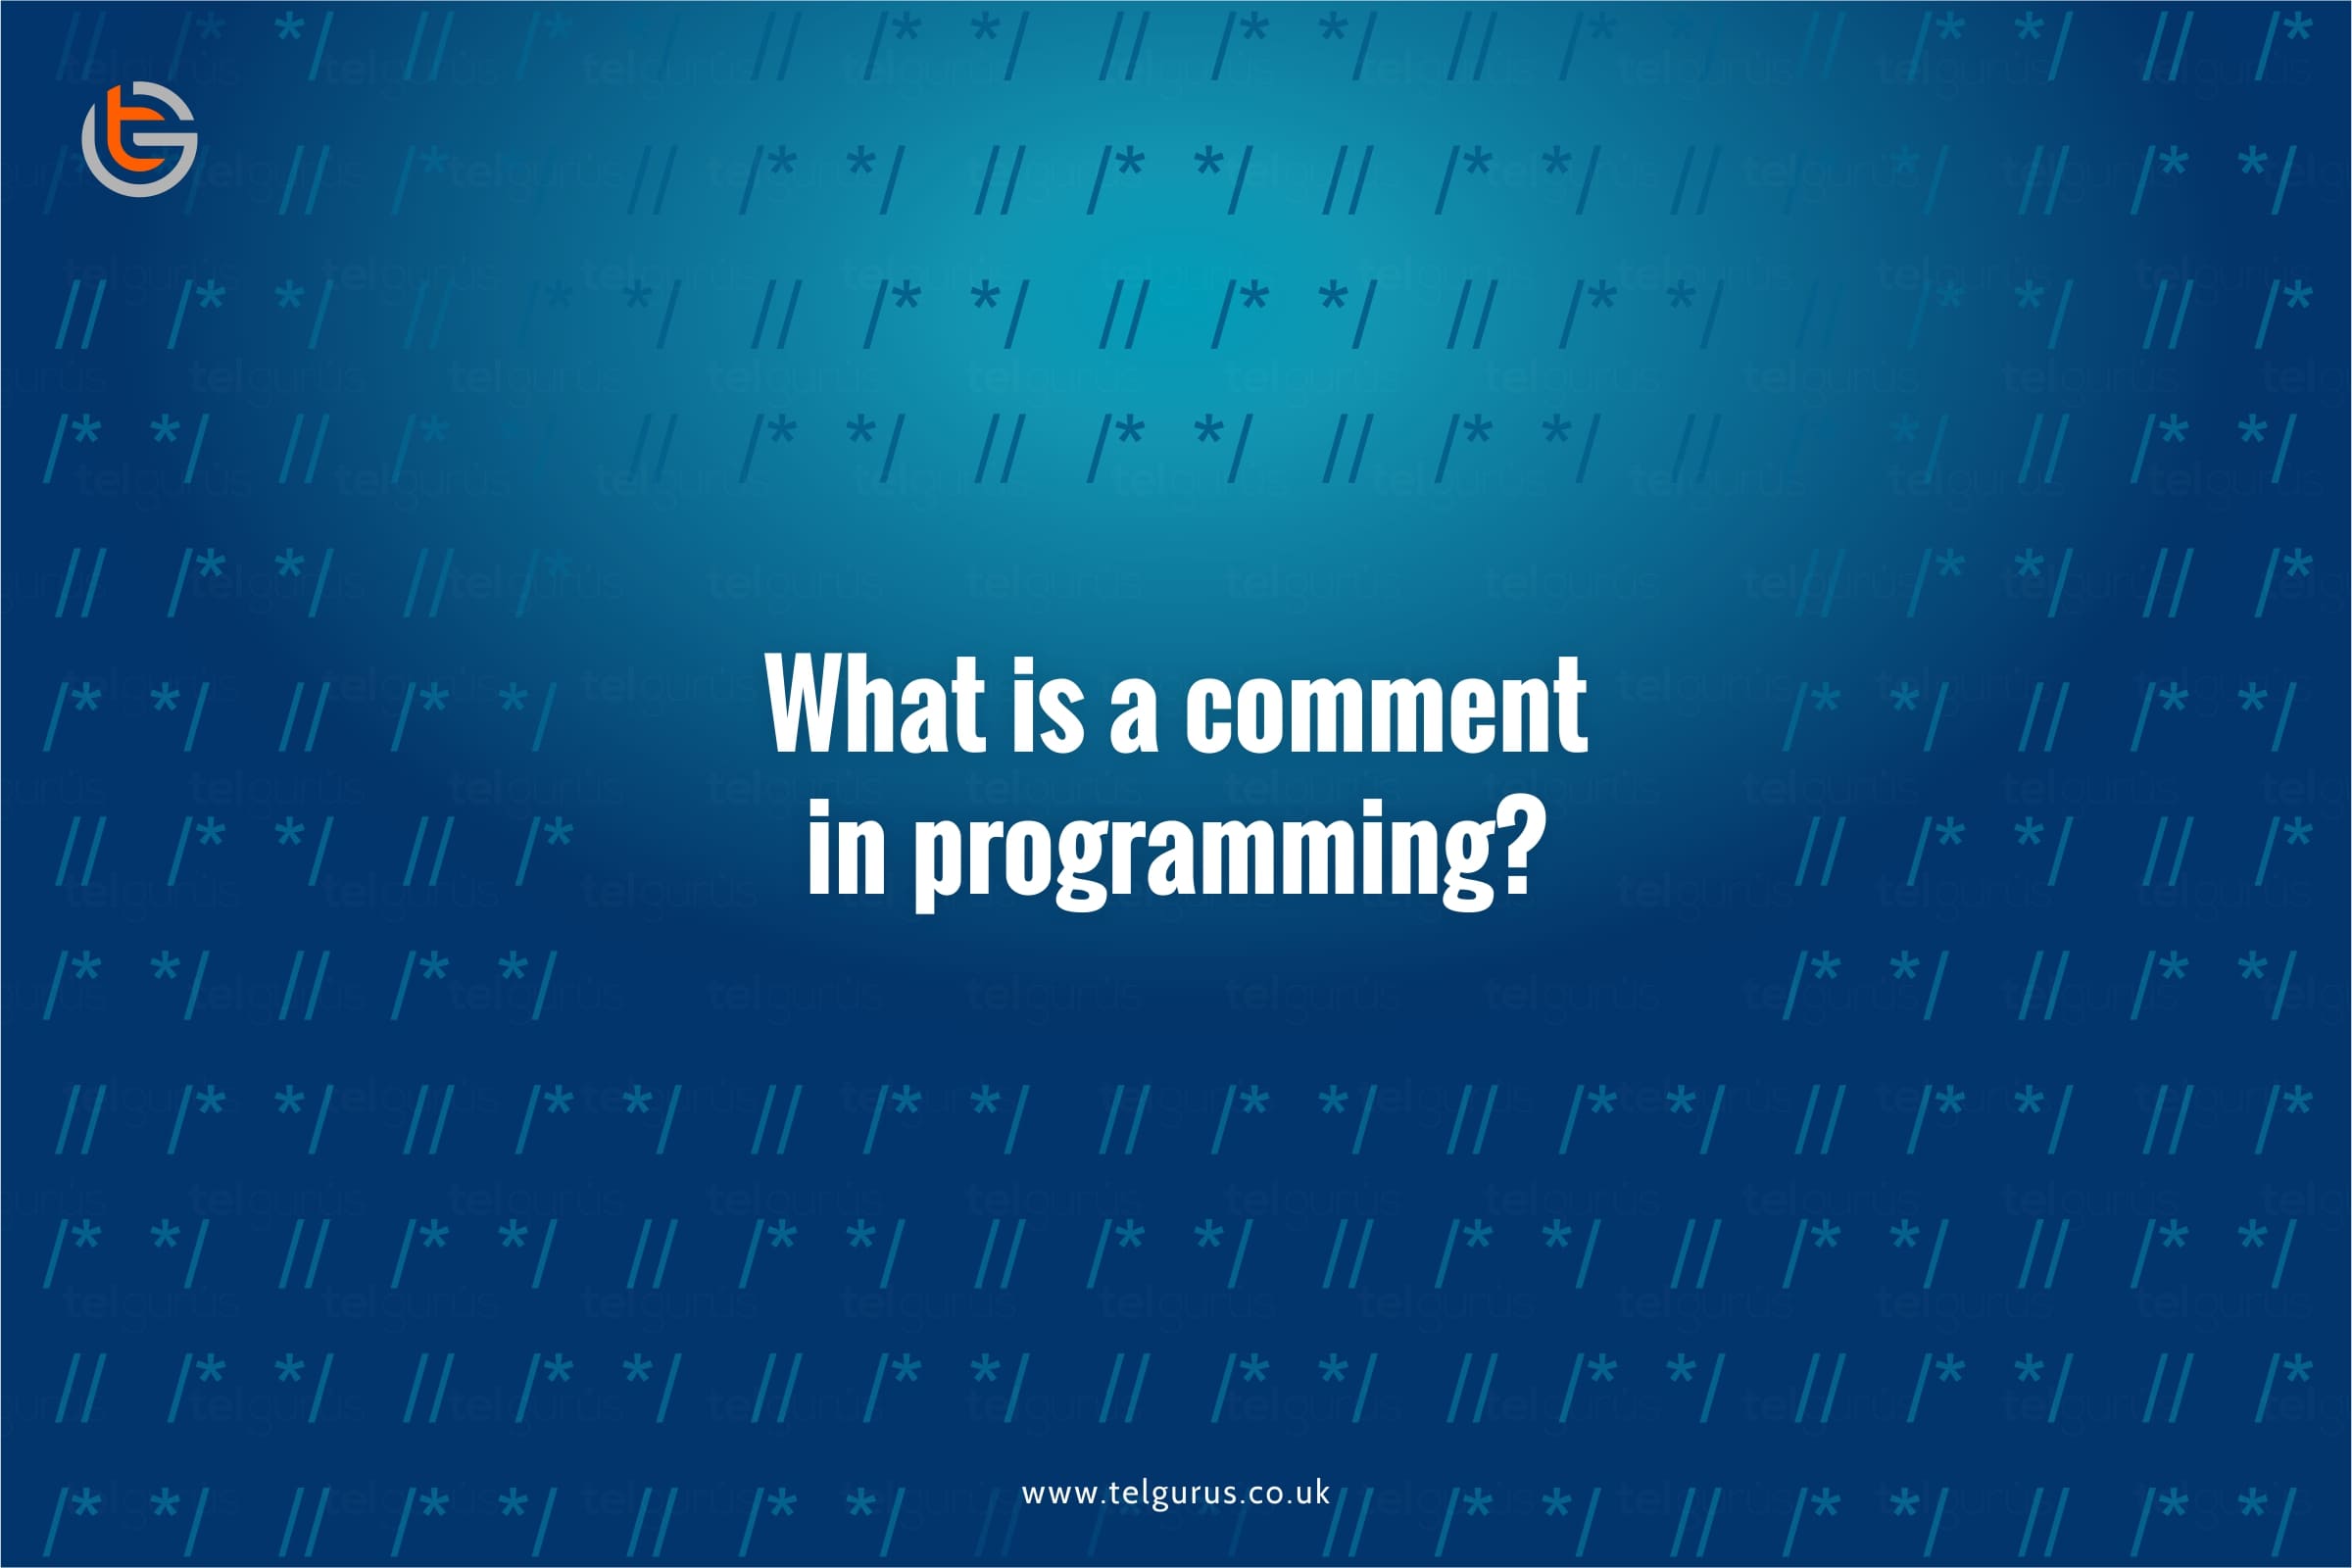 What is a comment in programming